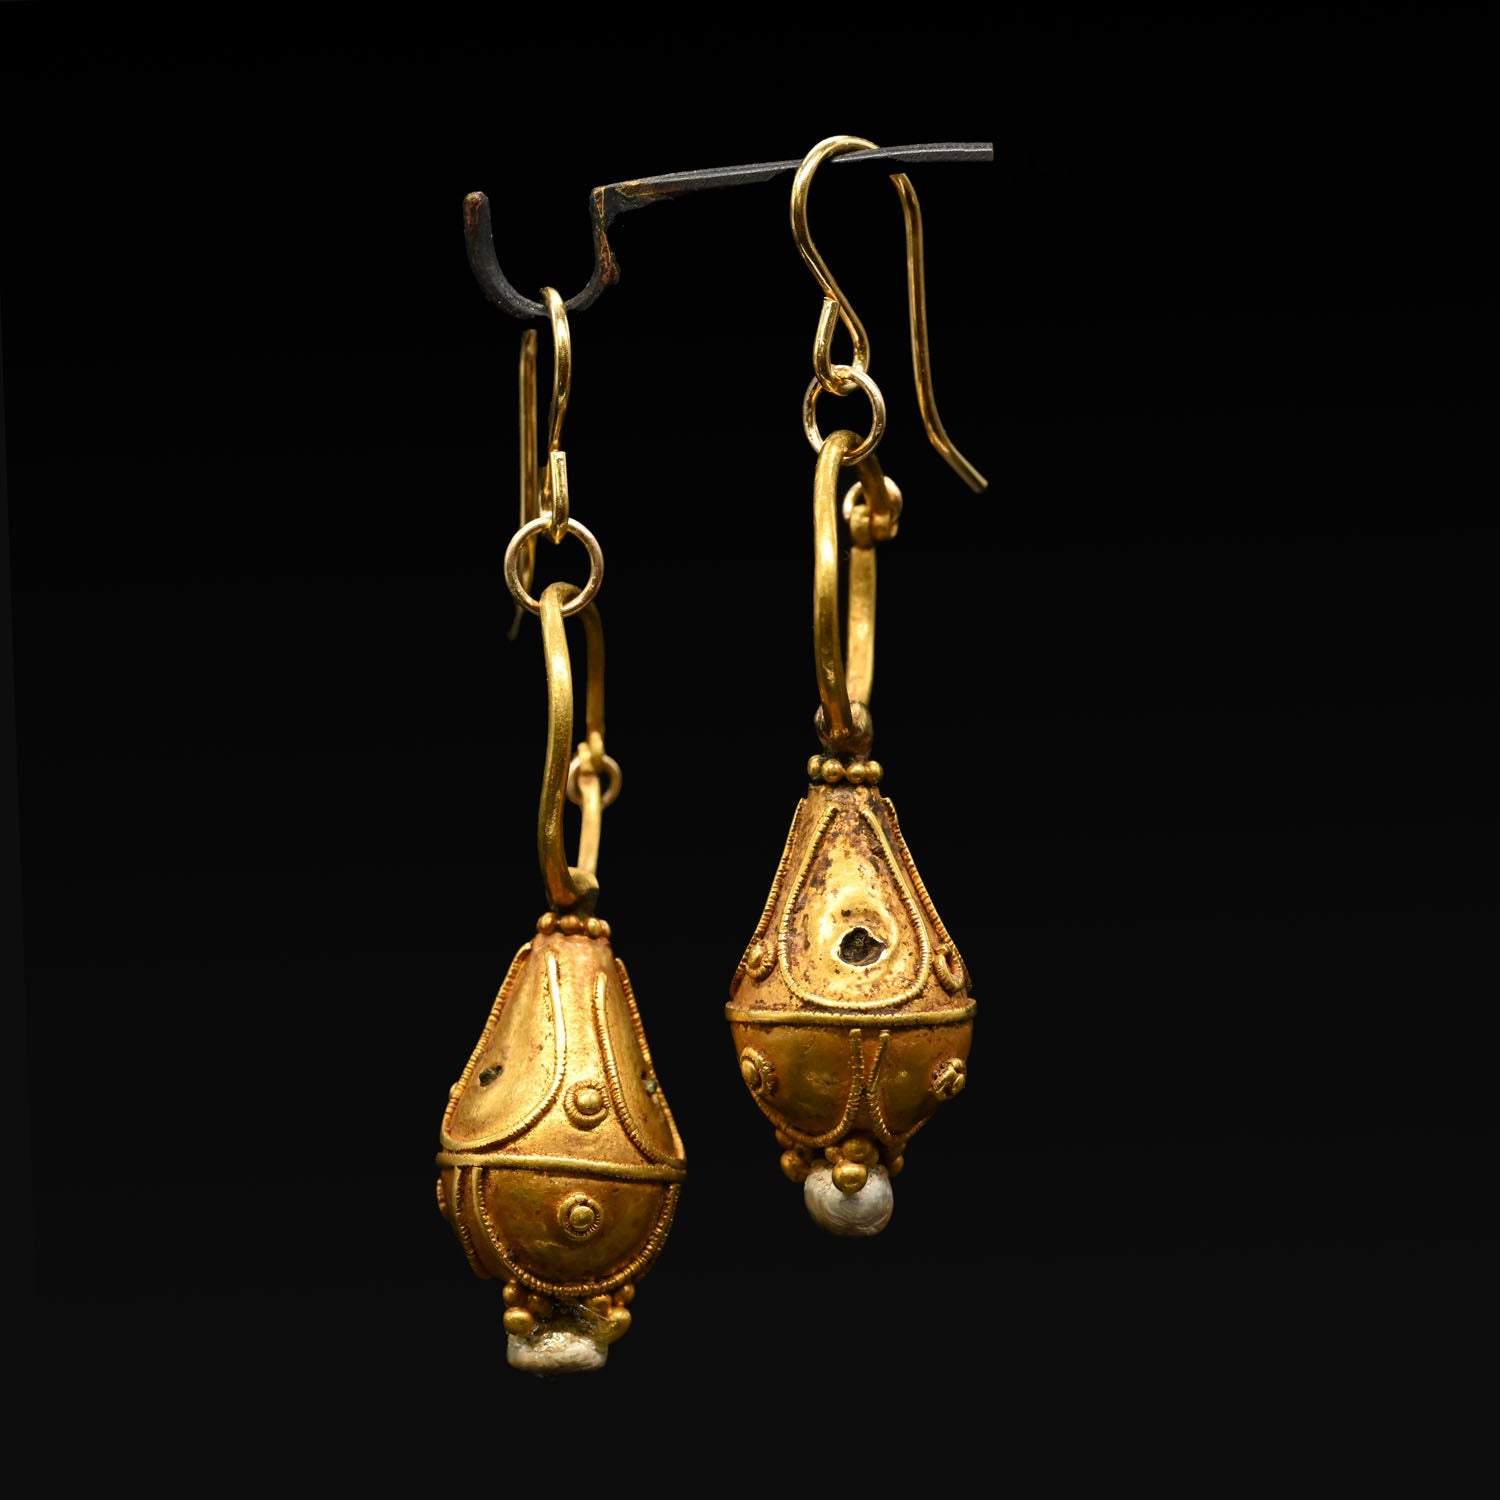 A pair of Late Byzantine gold Drop Earrings, ca. 5th century CE